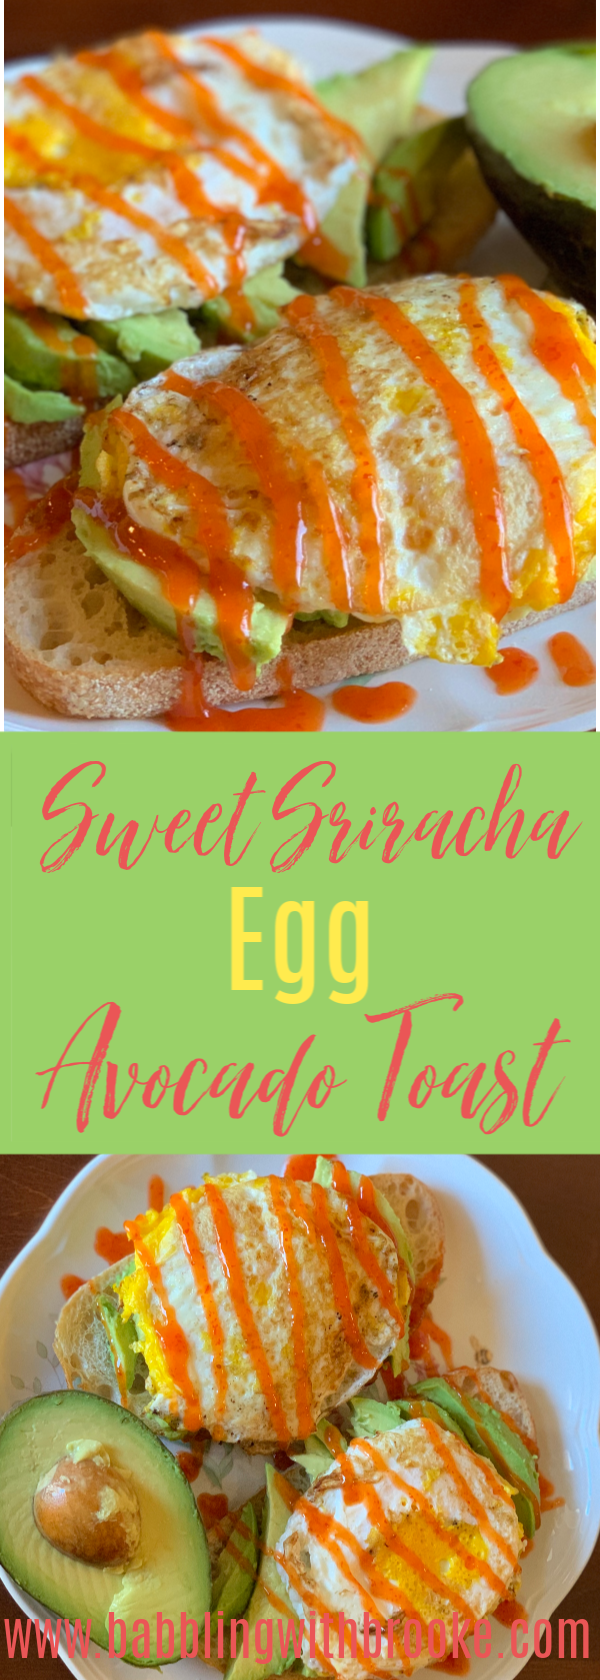 This easy and delicious avocado toast recipe is perfect for an easy breakfast or easy lunch! One of the best avocado toast recipes that I've created and tried! #avocadotoastrecipe #lunchavocadotoast #breakfastavocadotoast #easybreakfastrecipe #easylunchrecipe